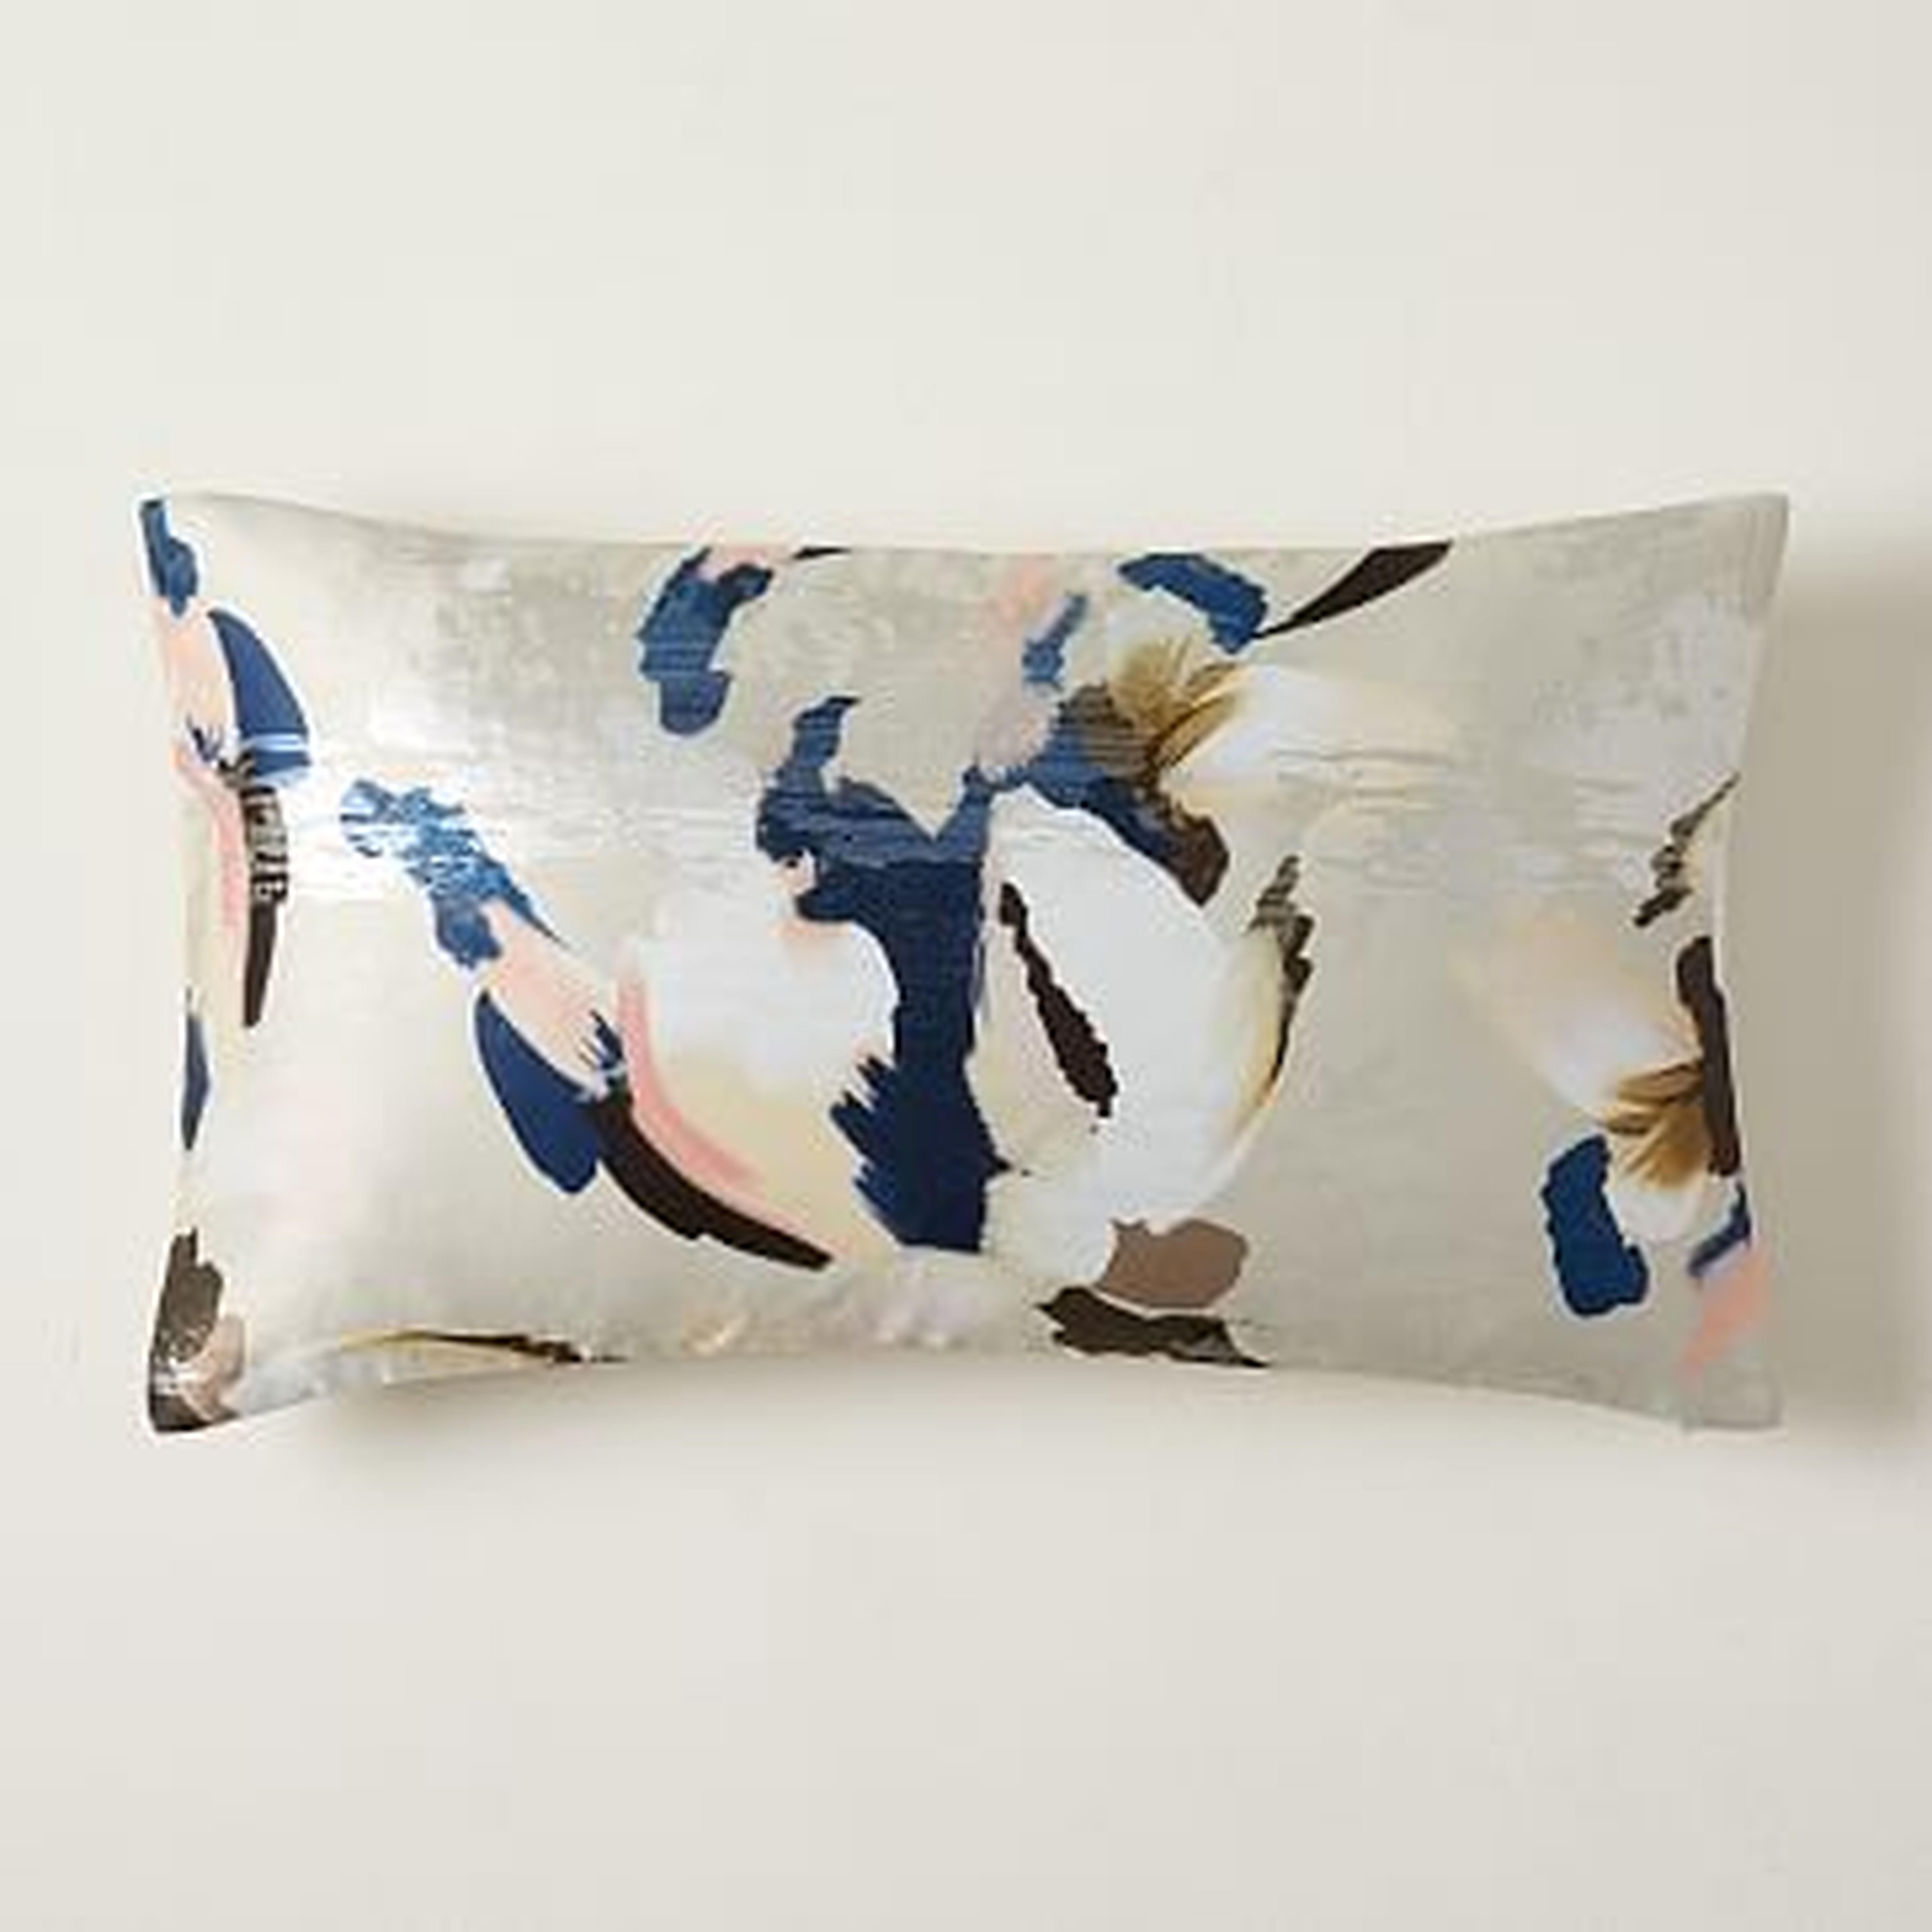 Floral Wash Brocade Pillow Cover, 12"x21", Midnight - West Elm